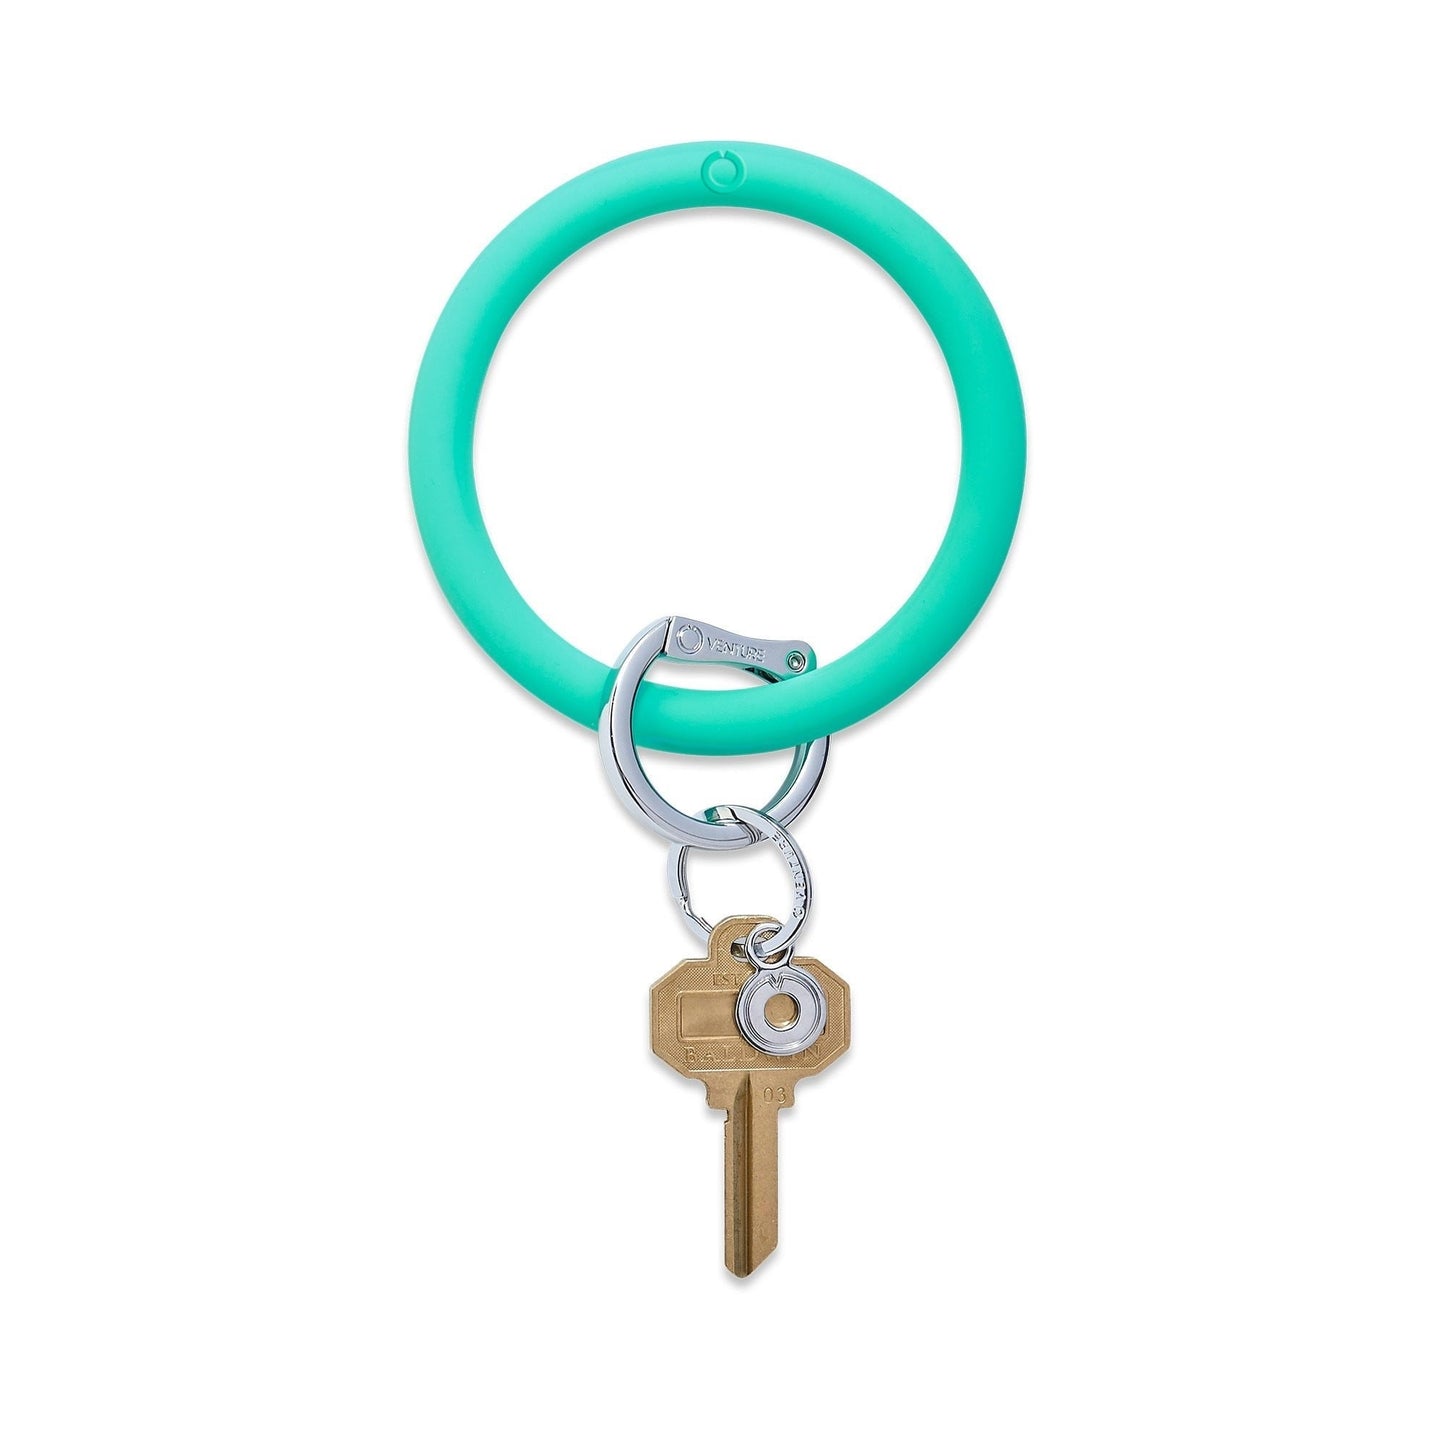 In the Pool - Silicone Big O Key Ring - Oventure